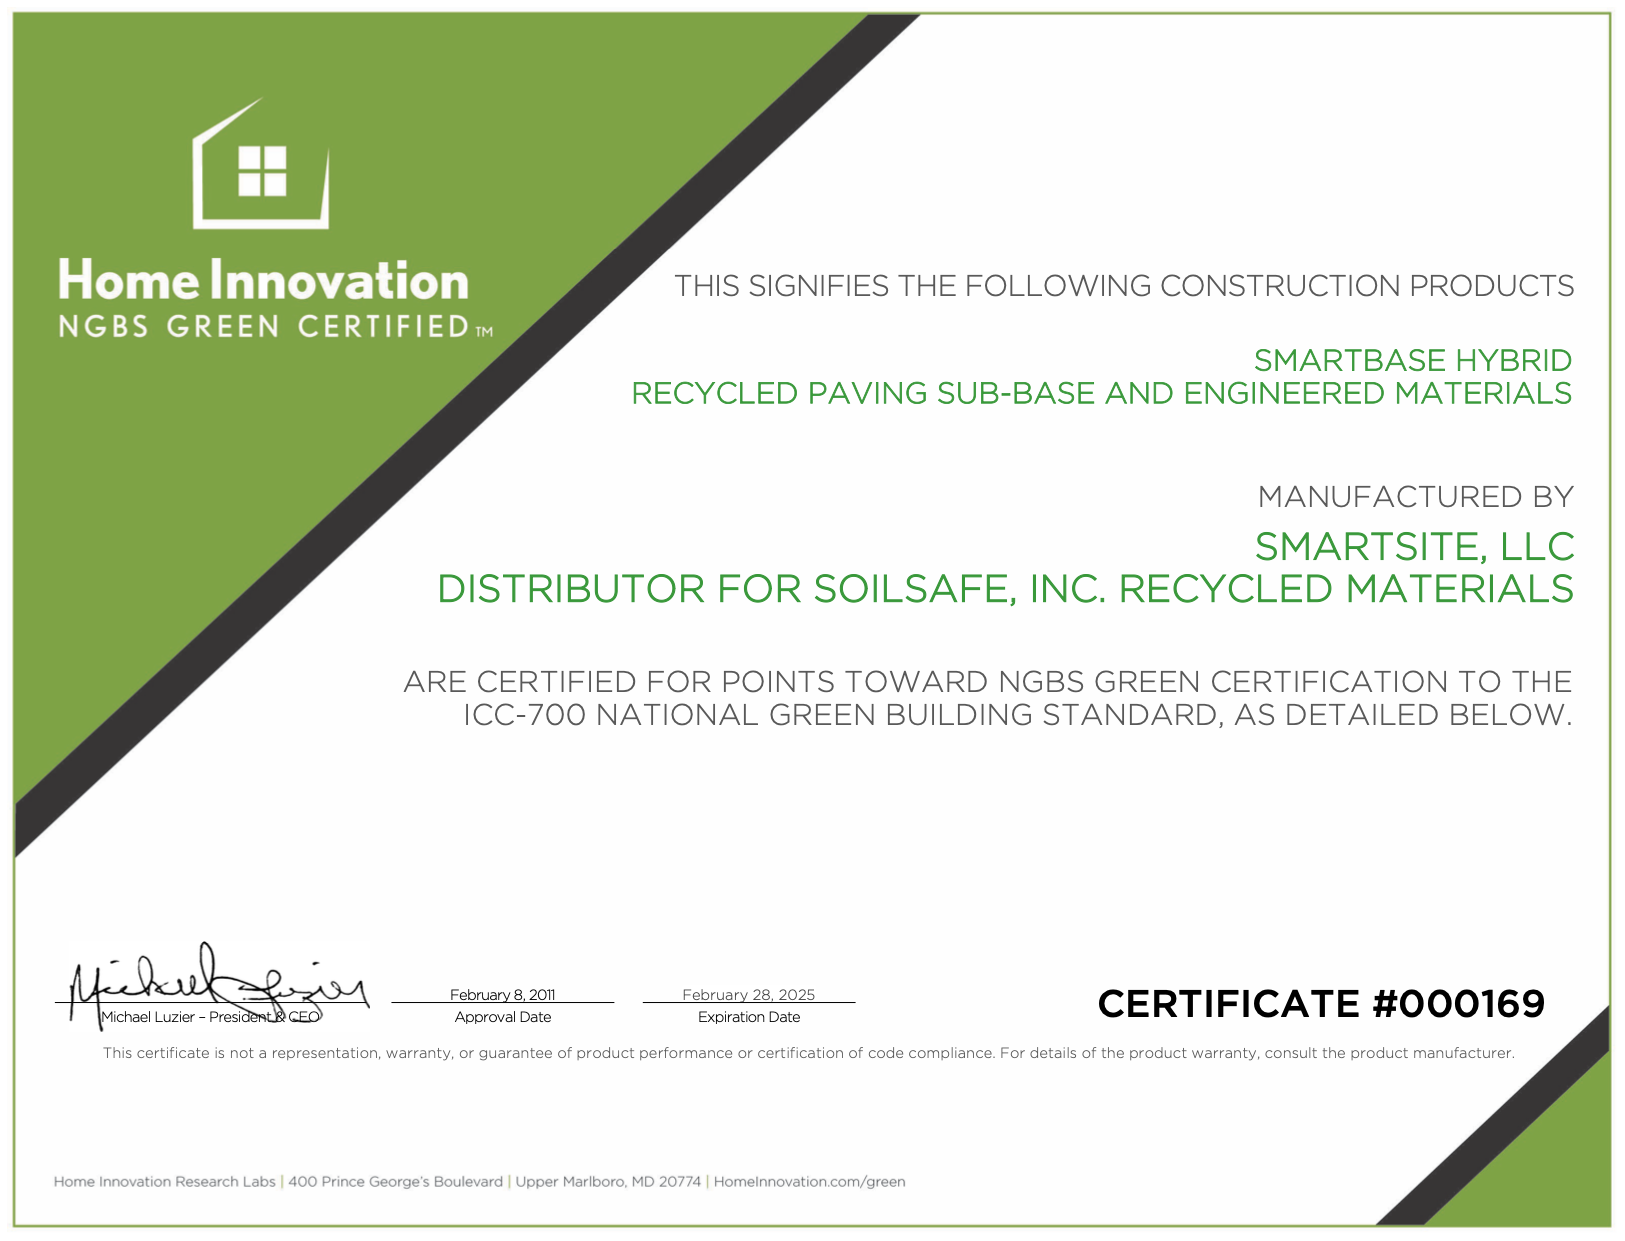 Soil Safe Earns Green Certification for 15th Consecutive Year